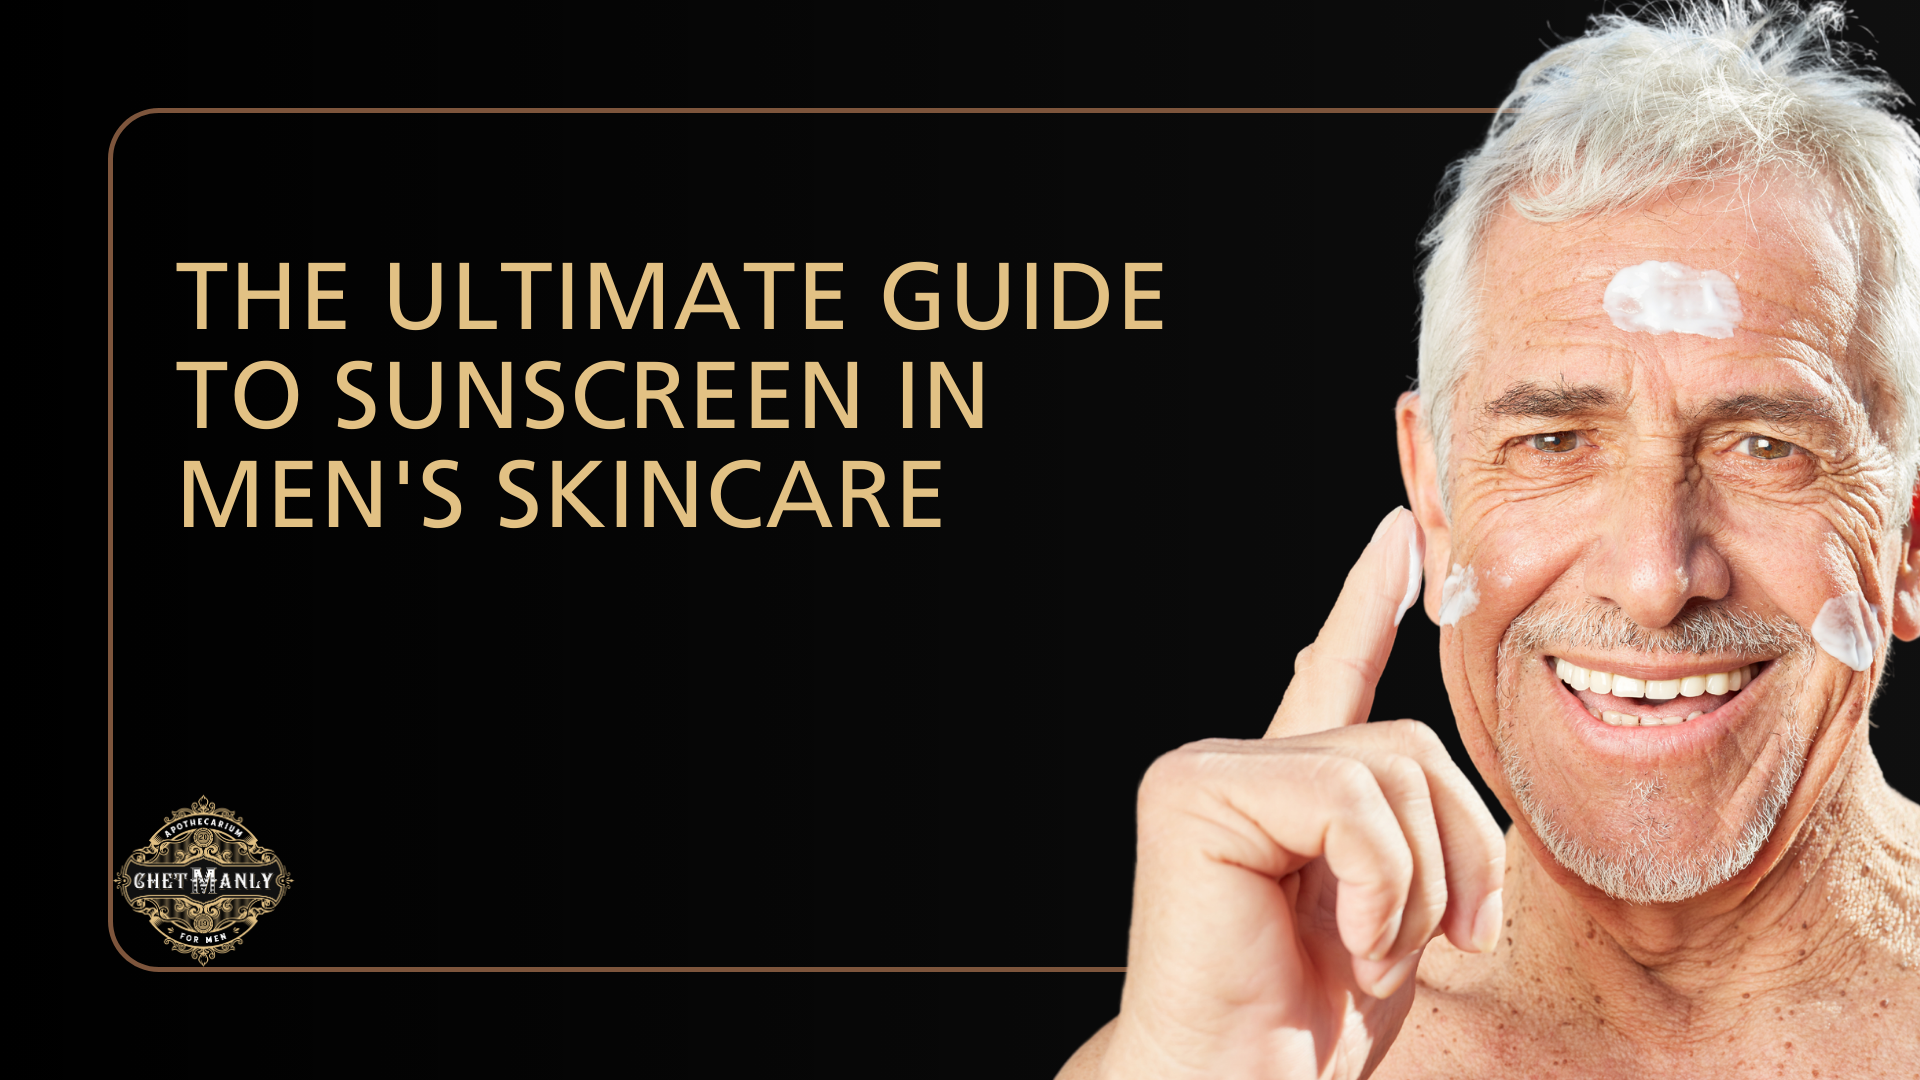 The Ultimate Guide to Sunscreen in Men's Skincare